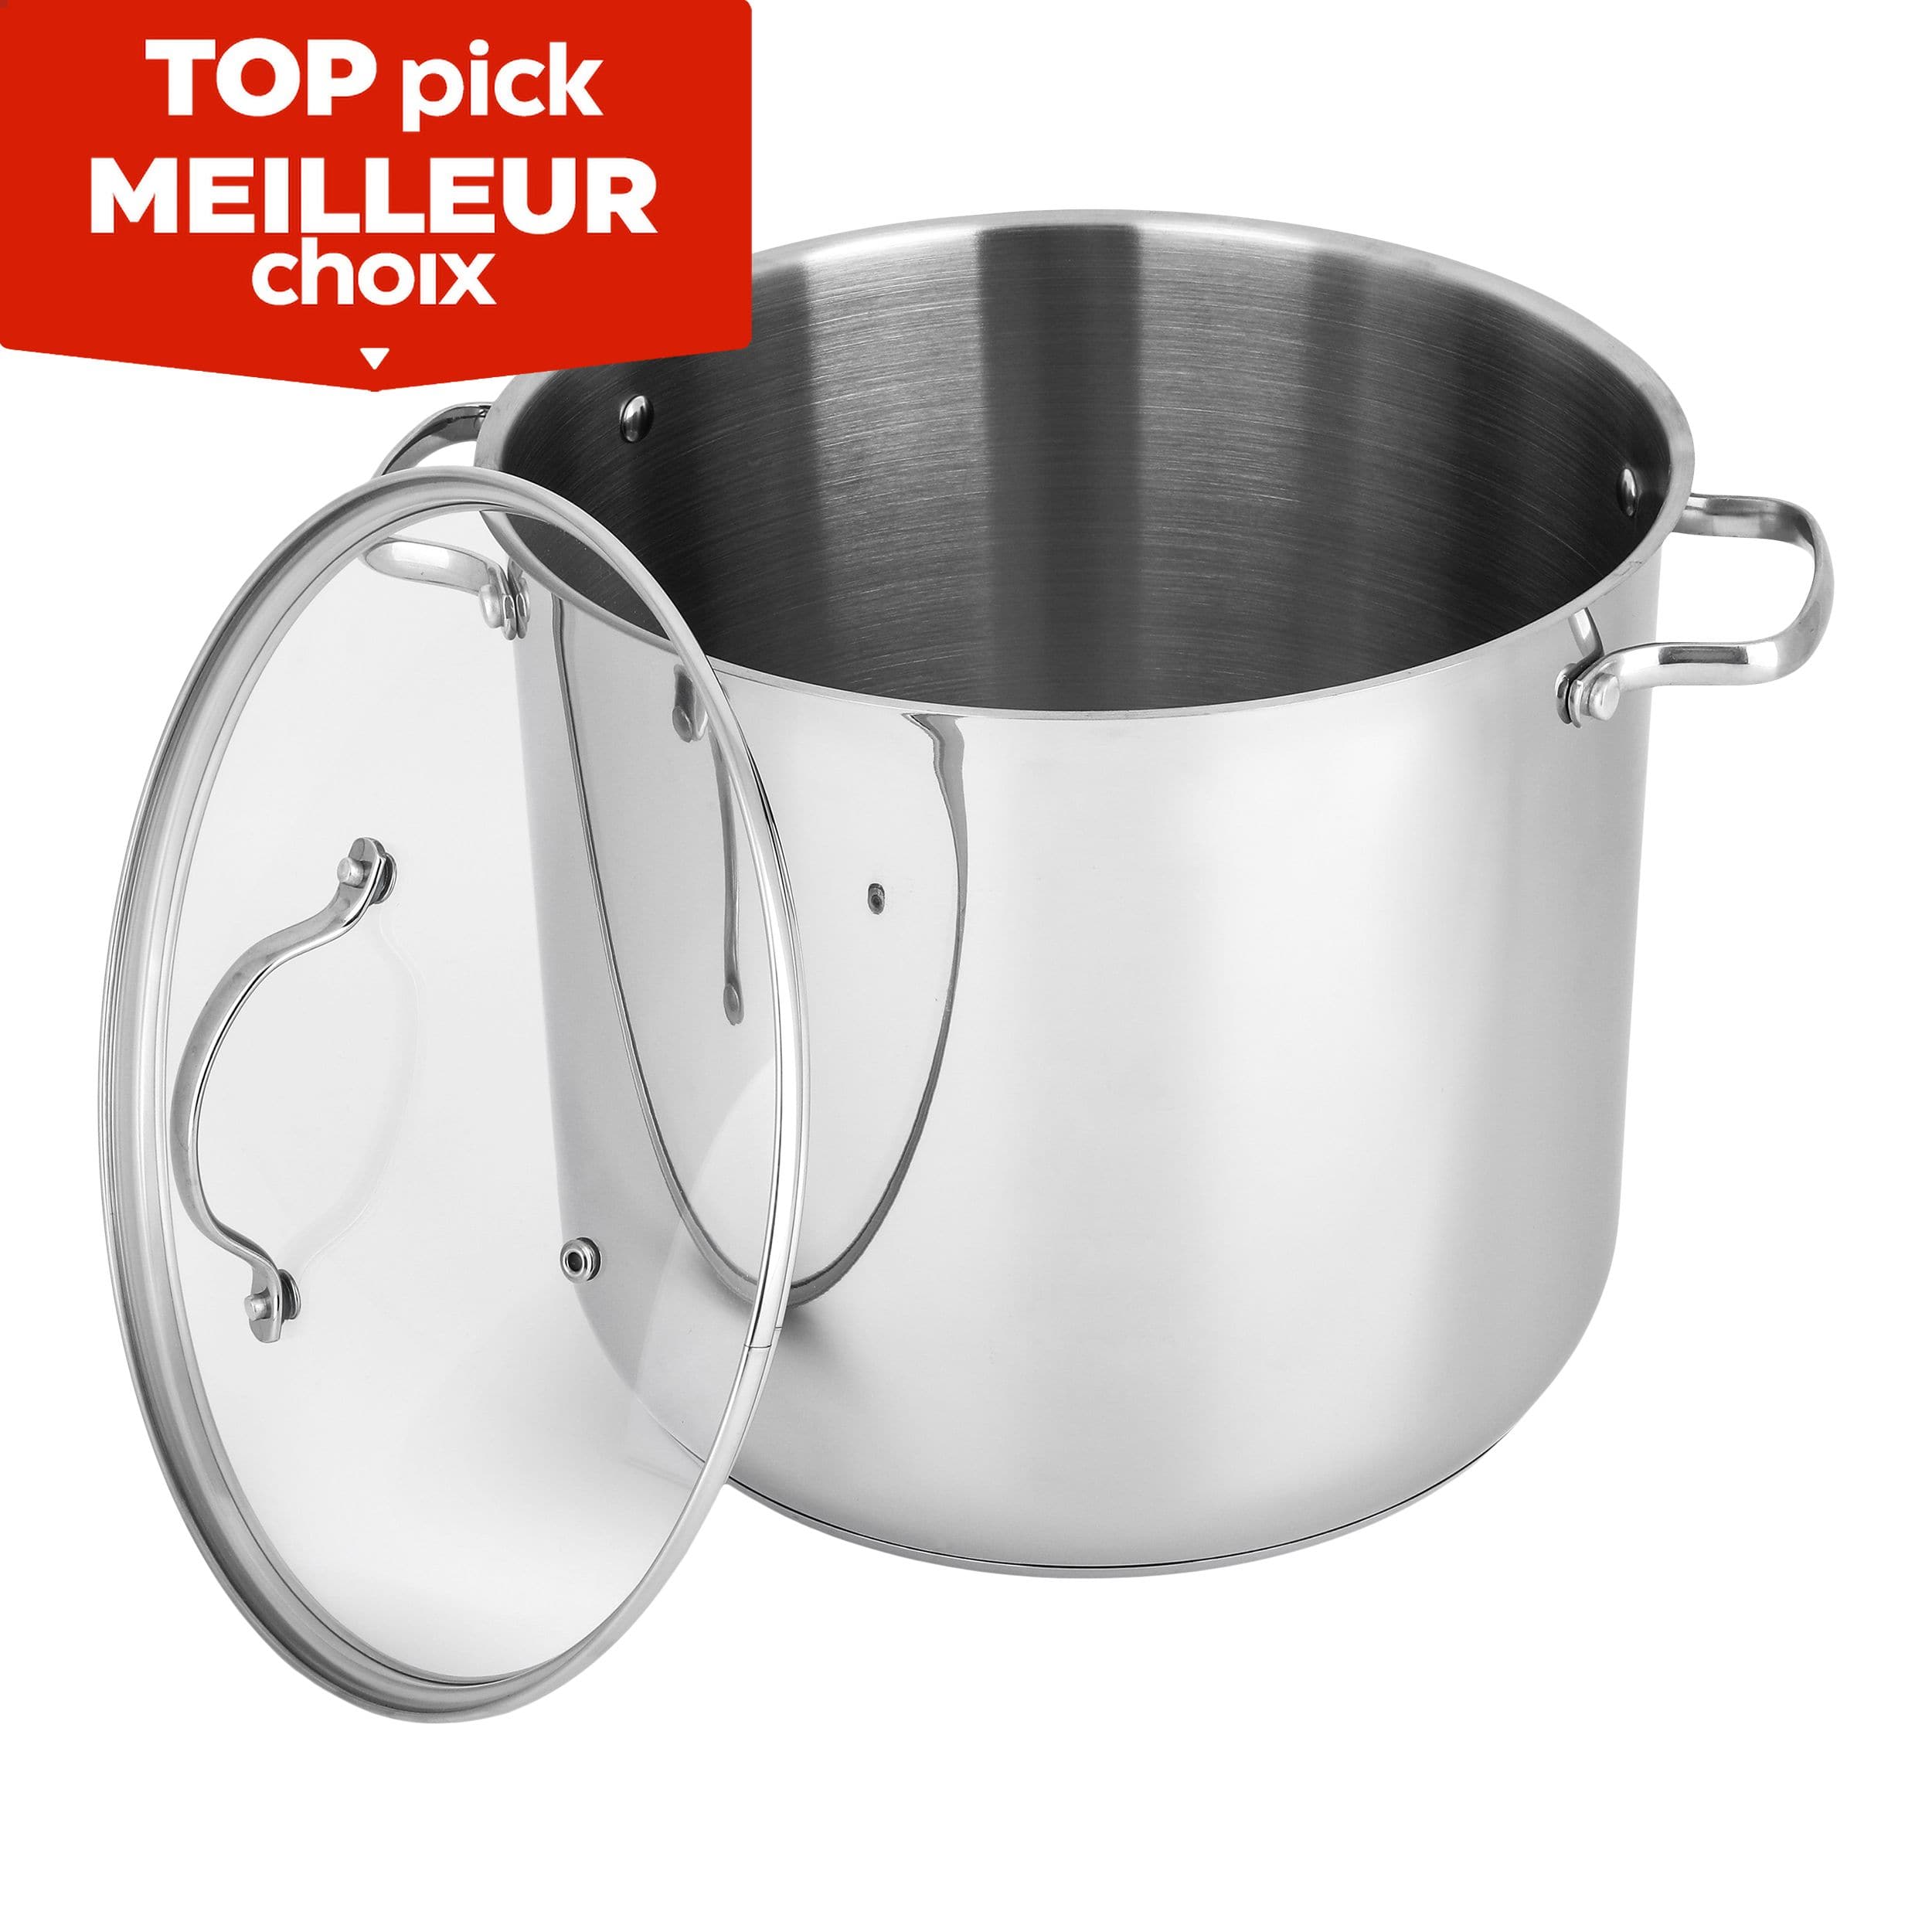 16 Quart Stock Pot Stainless Steel Large Kitchen Soup Big Cooking Glass Lid